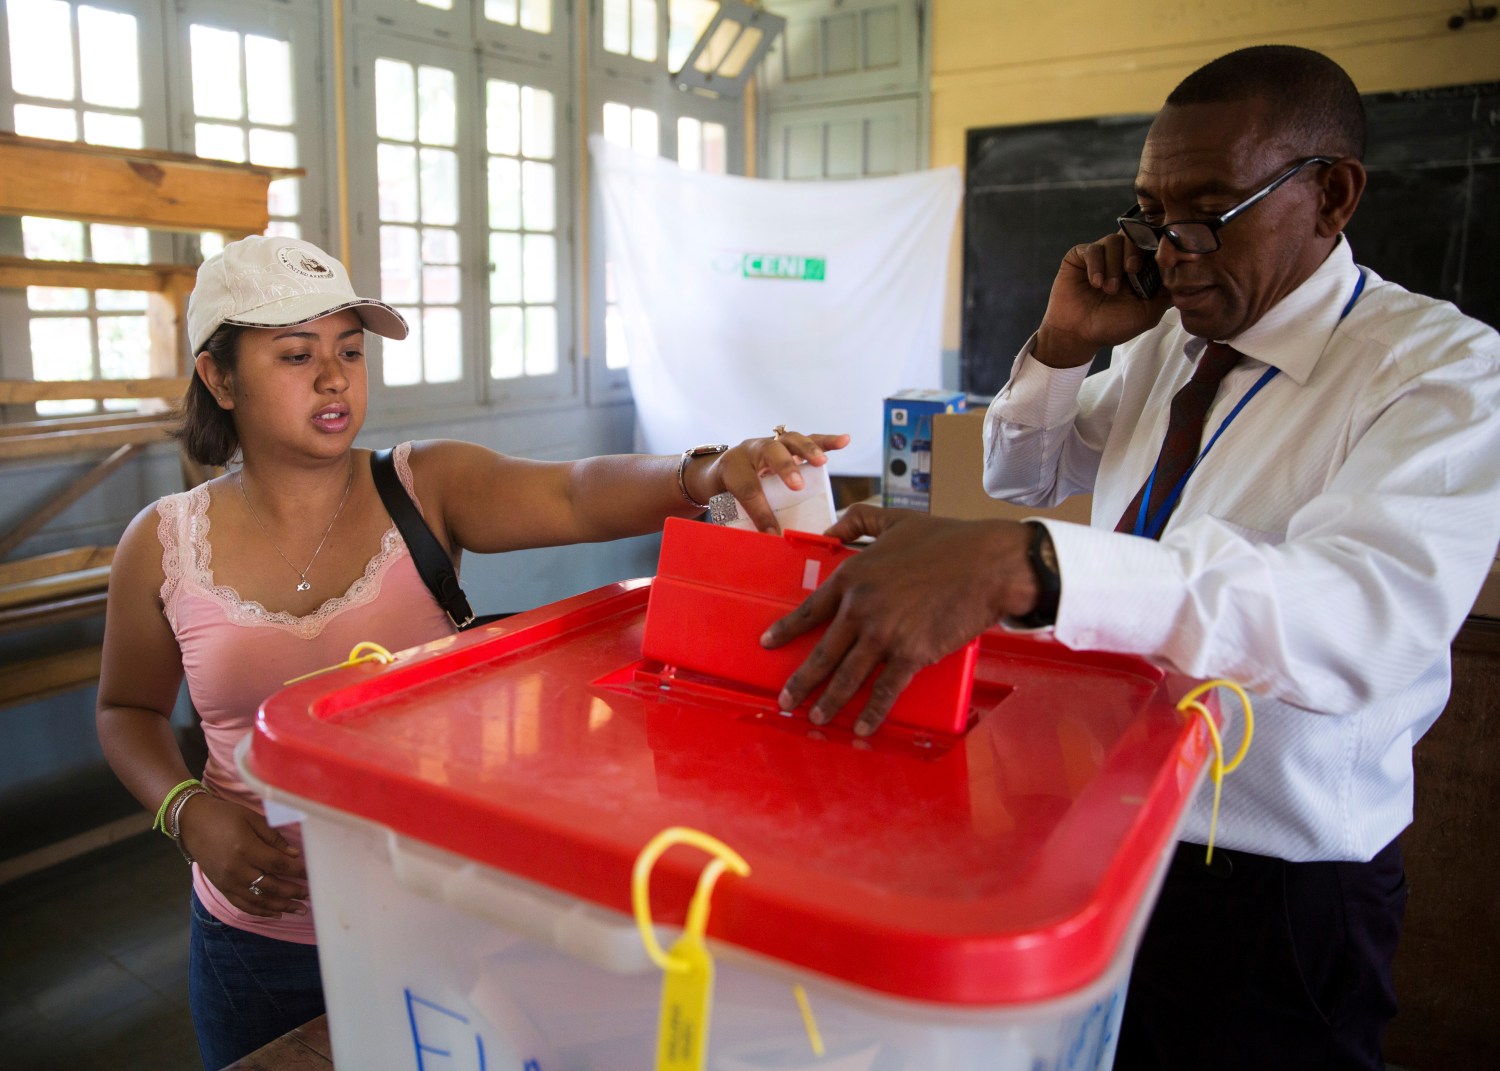 A voter casts their ballot during the presidential election at a polling centre in Analakely, Antananarivo, Madagascar November 7, 2018. REUTERS/Malin Palm - RC15F4D62800